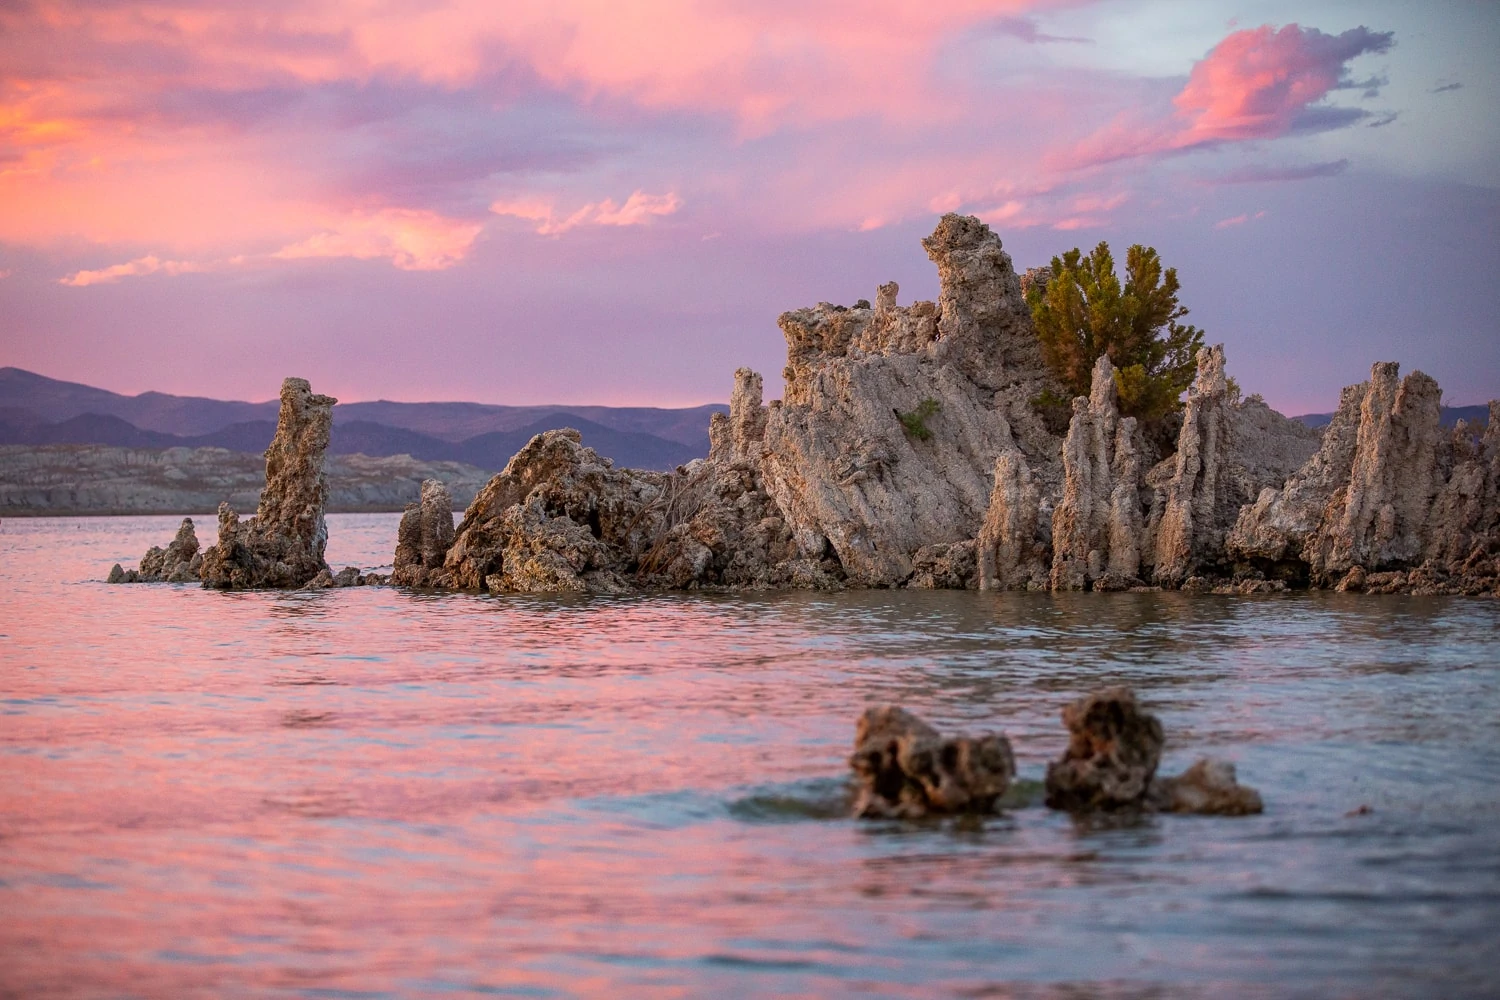 Sunset at mono lake's south tufa formations with a pink sky.